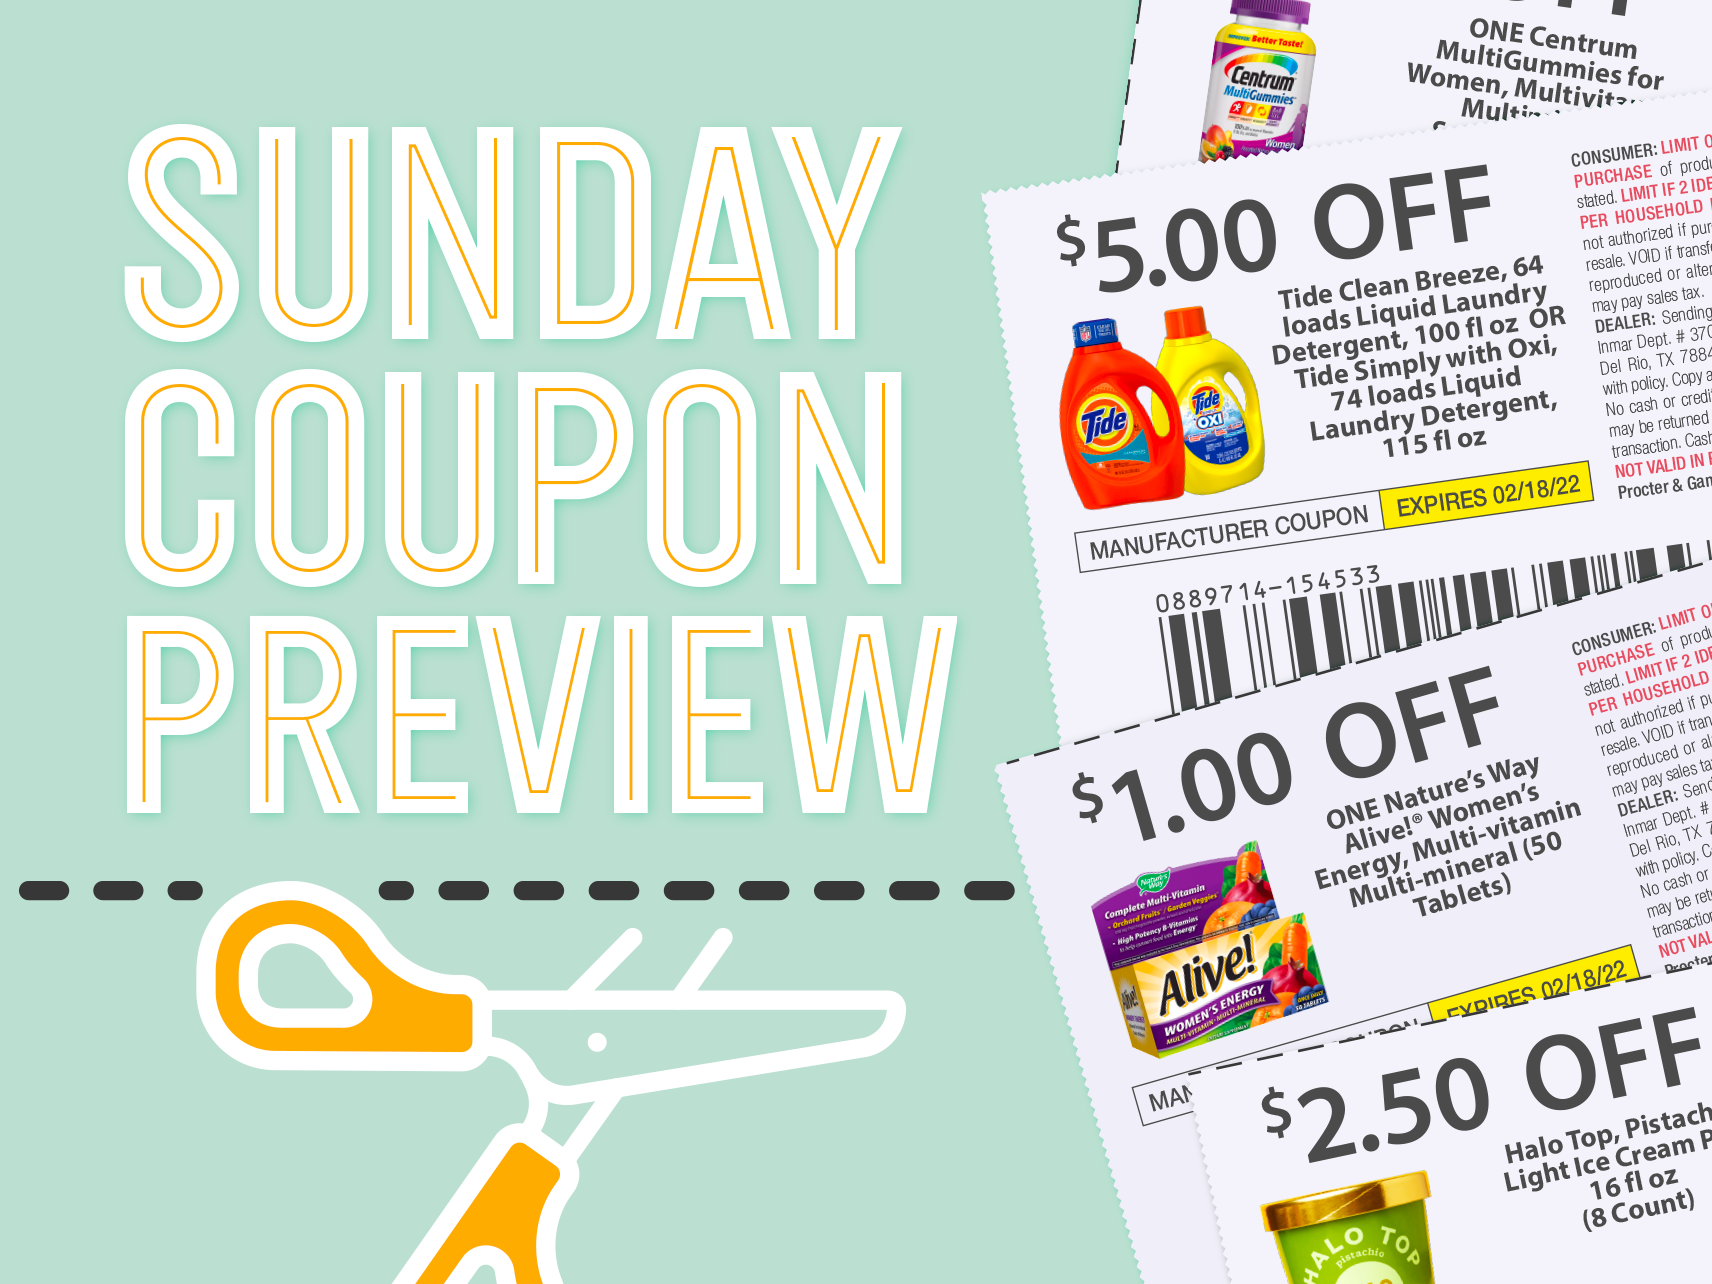 Sunday Coupon Preview For 7/3 – One Insert